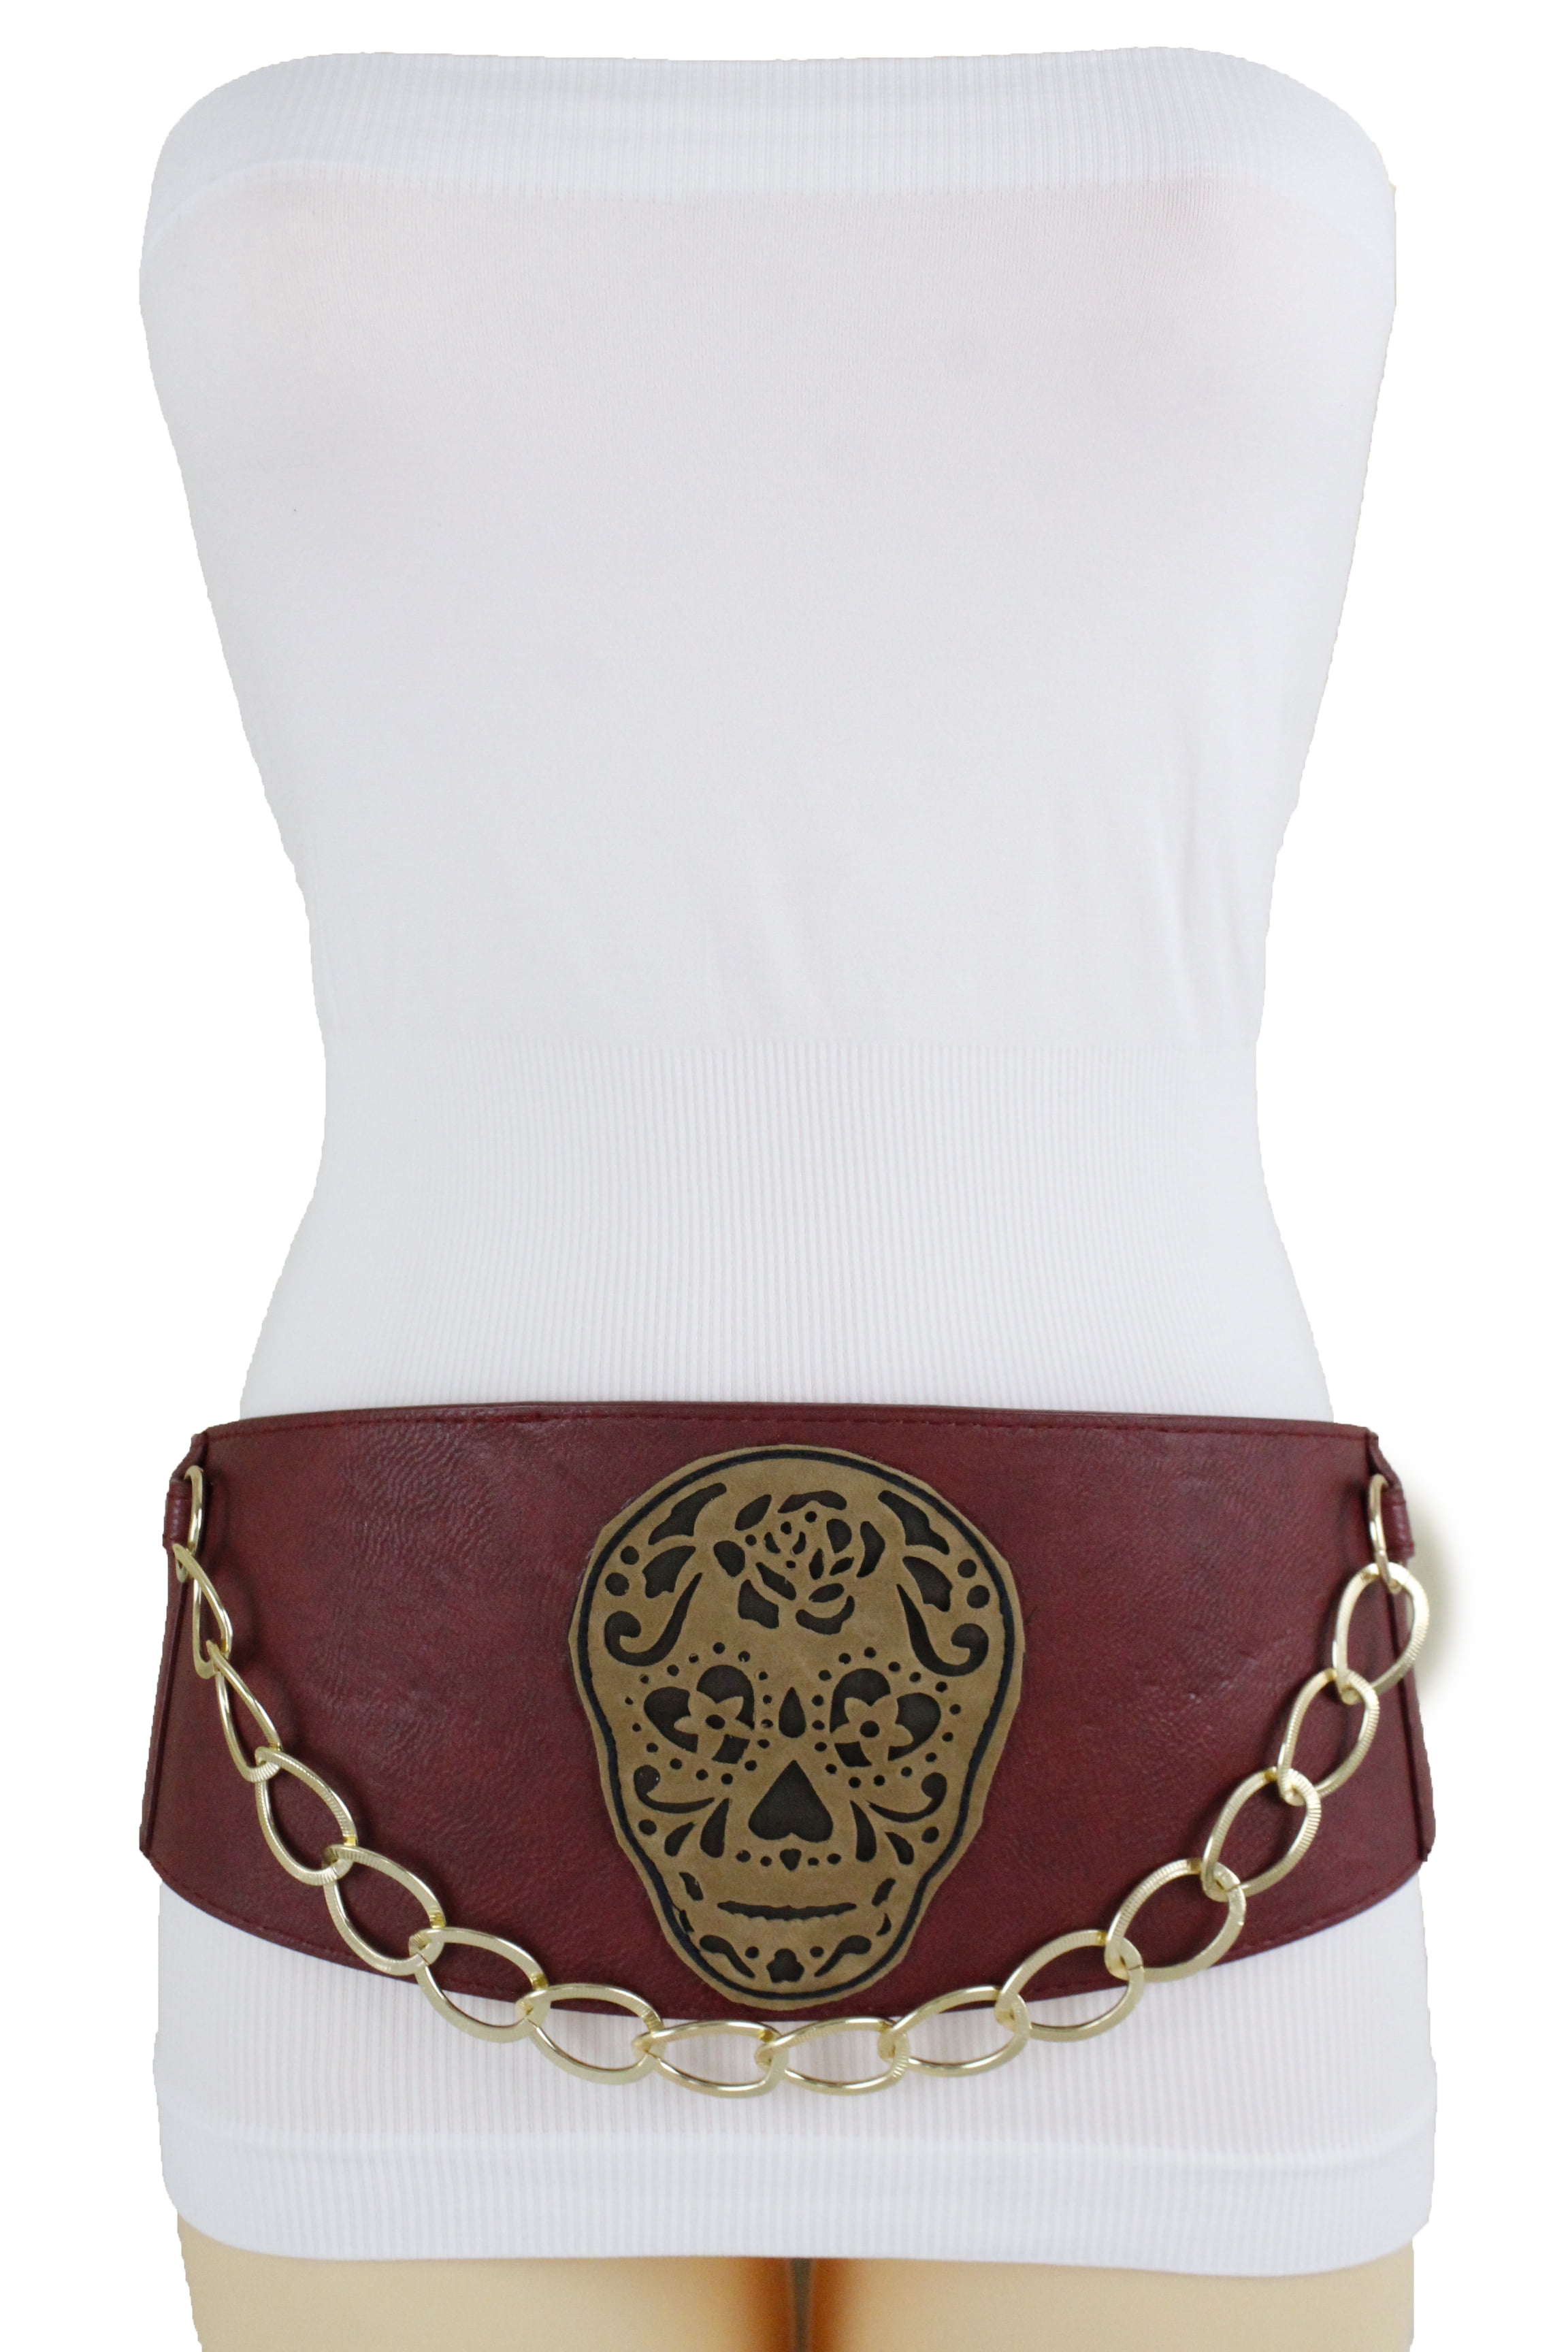 Women Fashion Corset Belt Extra Wide Red Faux Leather Stretch Waistband M L XL 